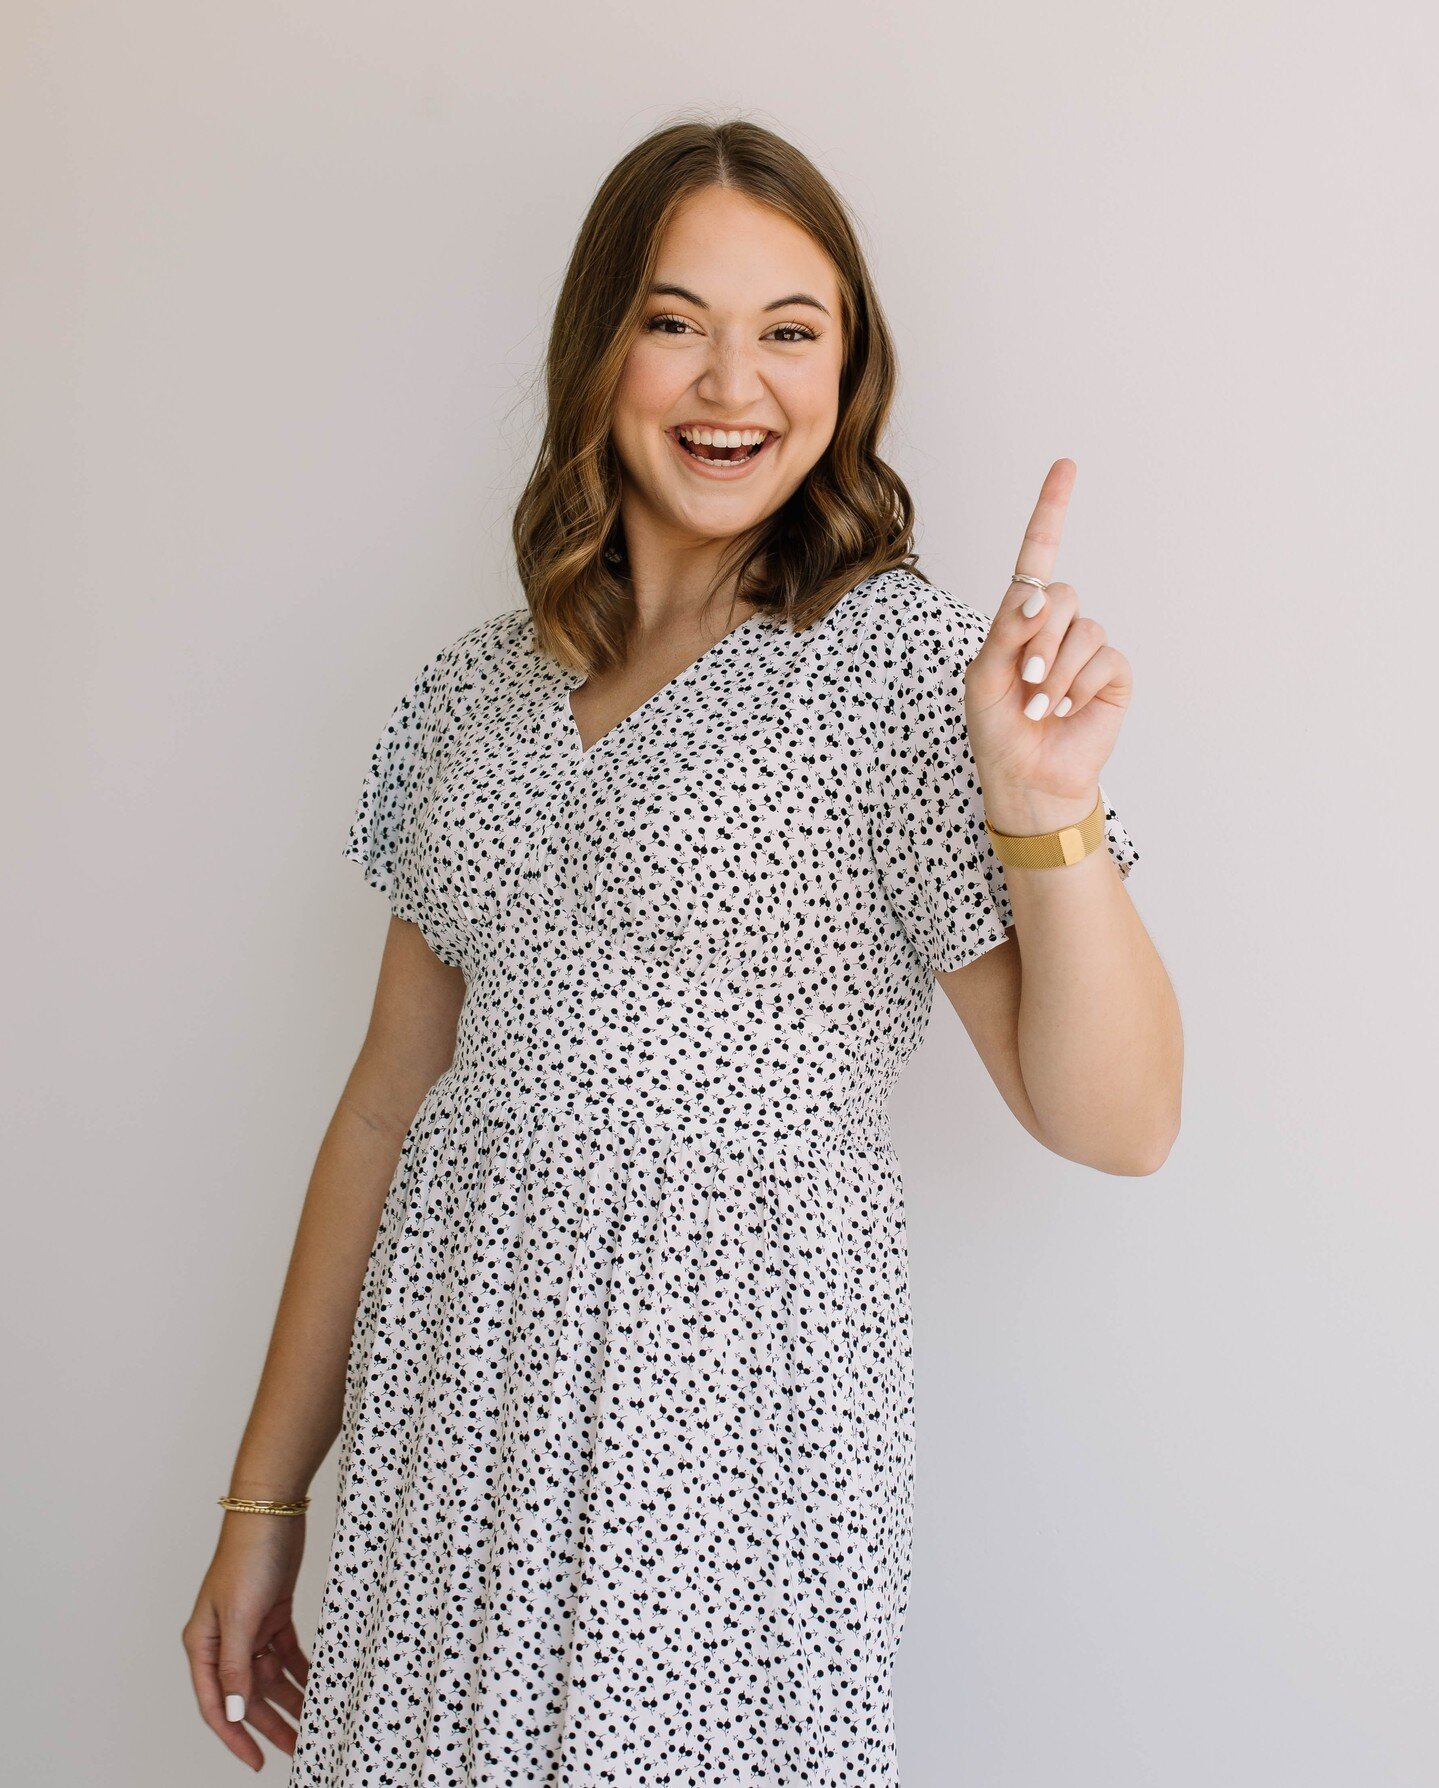 Help us celebrate our warm, bubbly, and talented, Social Media Coordinator - @kyliegarrett !

Wish her a Happy One Year work-iversiary, would ya?

You'll never catch Kylie without an iced coffee in her hand or a smile on her face, and we love her for